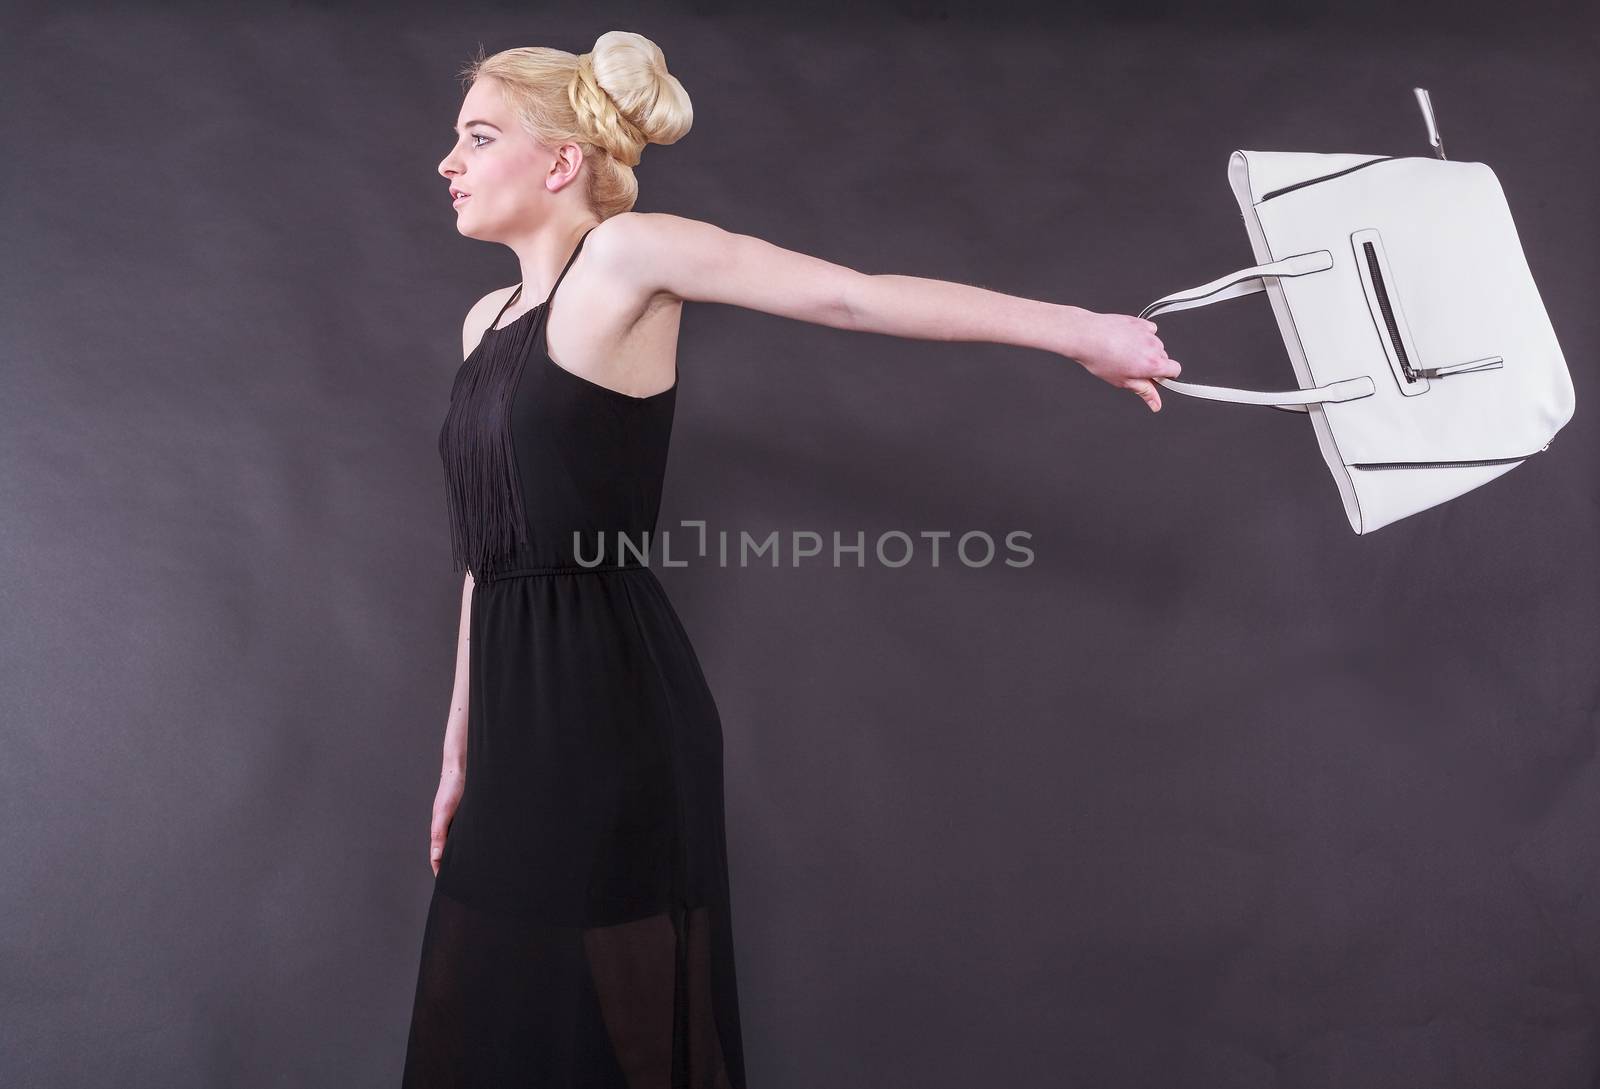 Lively young blond woman in a black dress with a white handbag on an outstretched arm back before black background, studio shot.